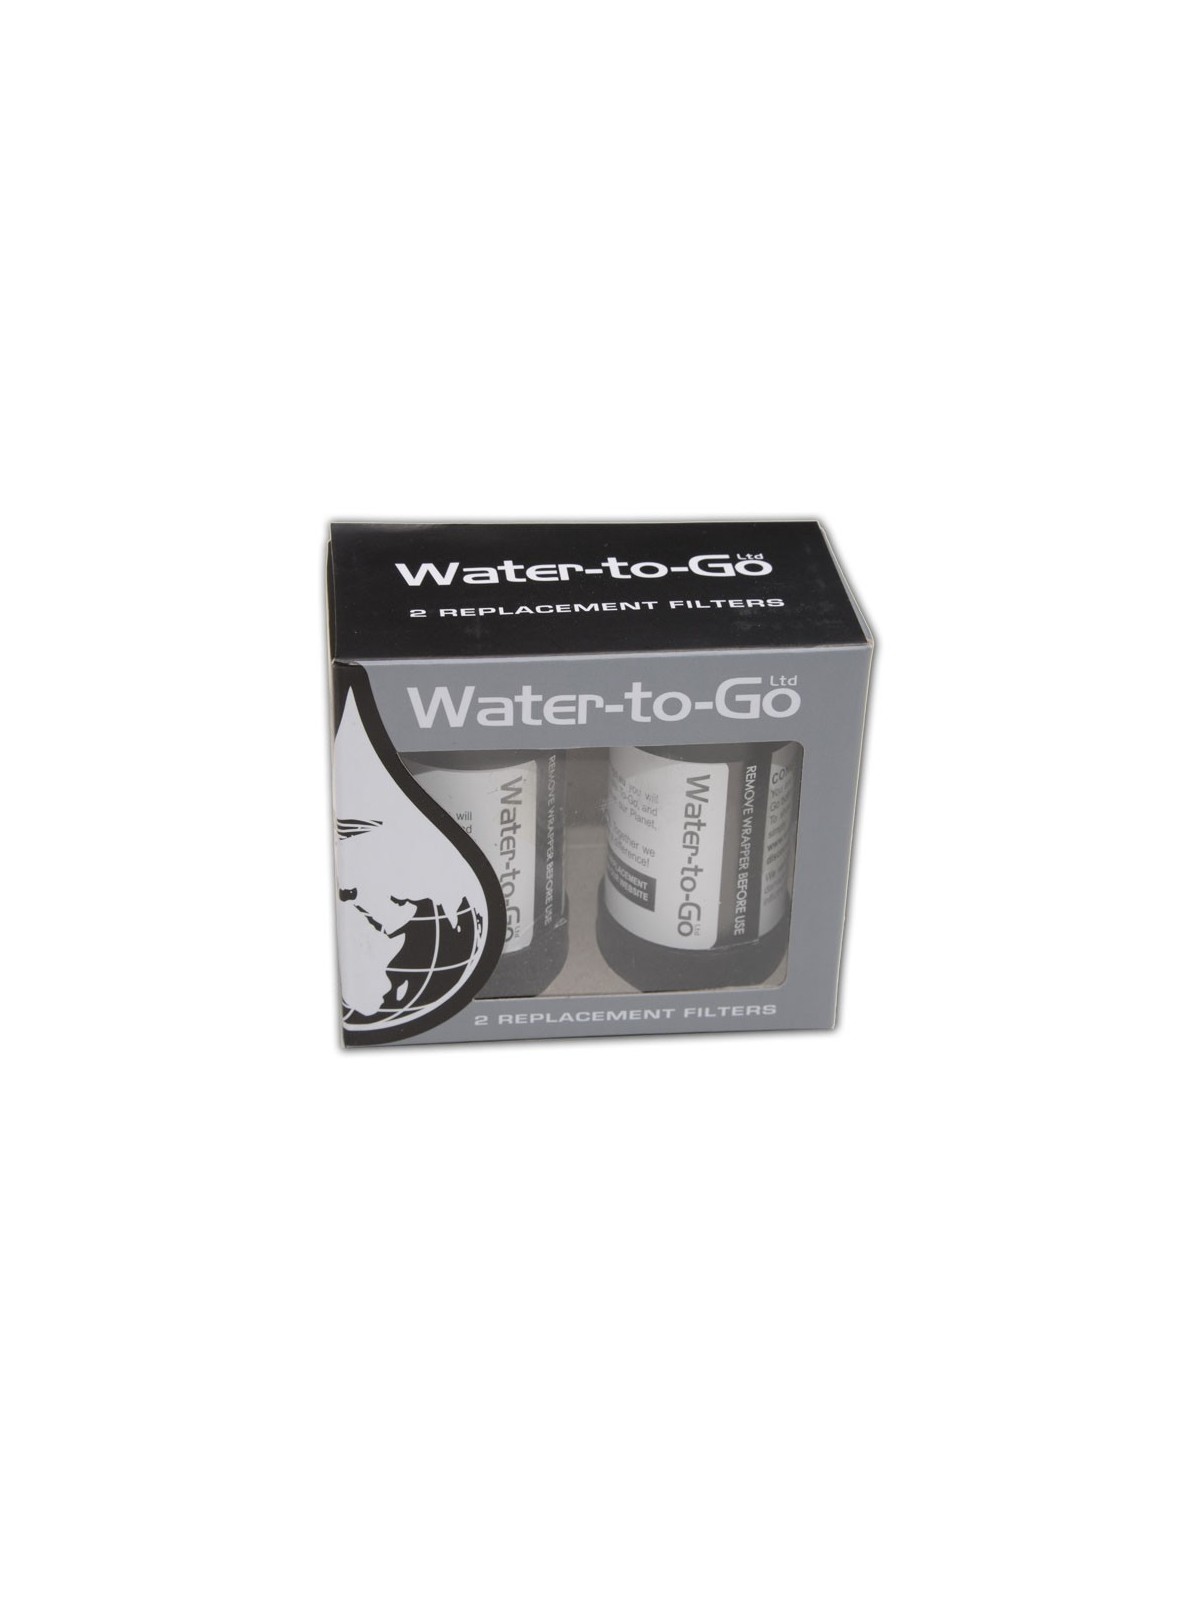 Pack of two filters for Water-to-Go bottle